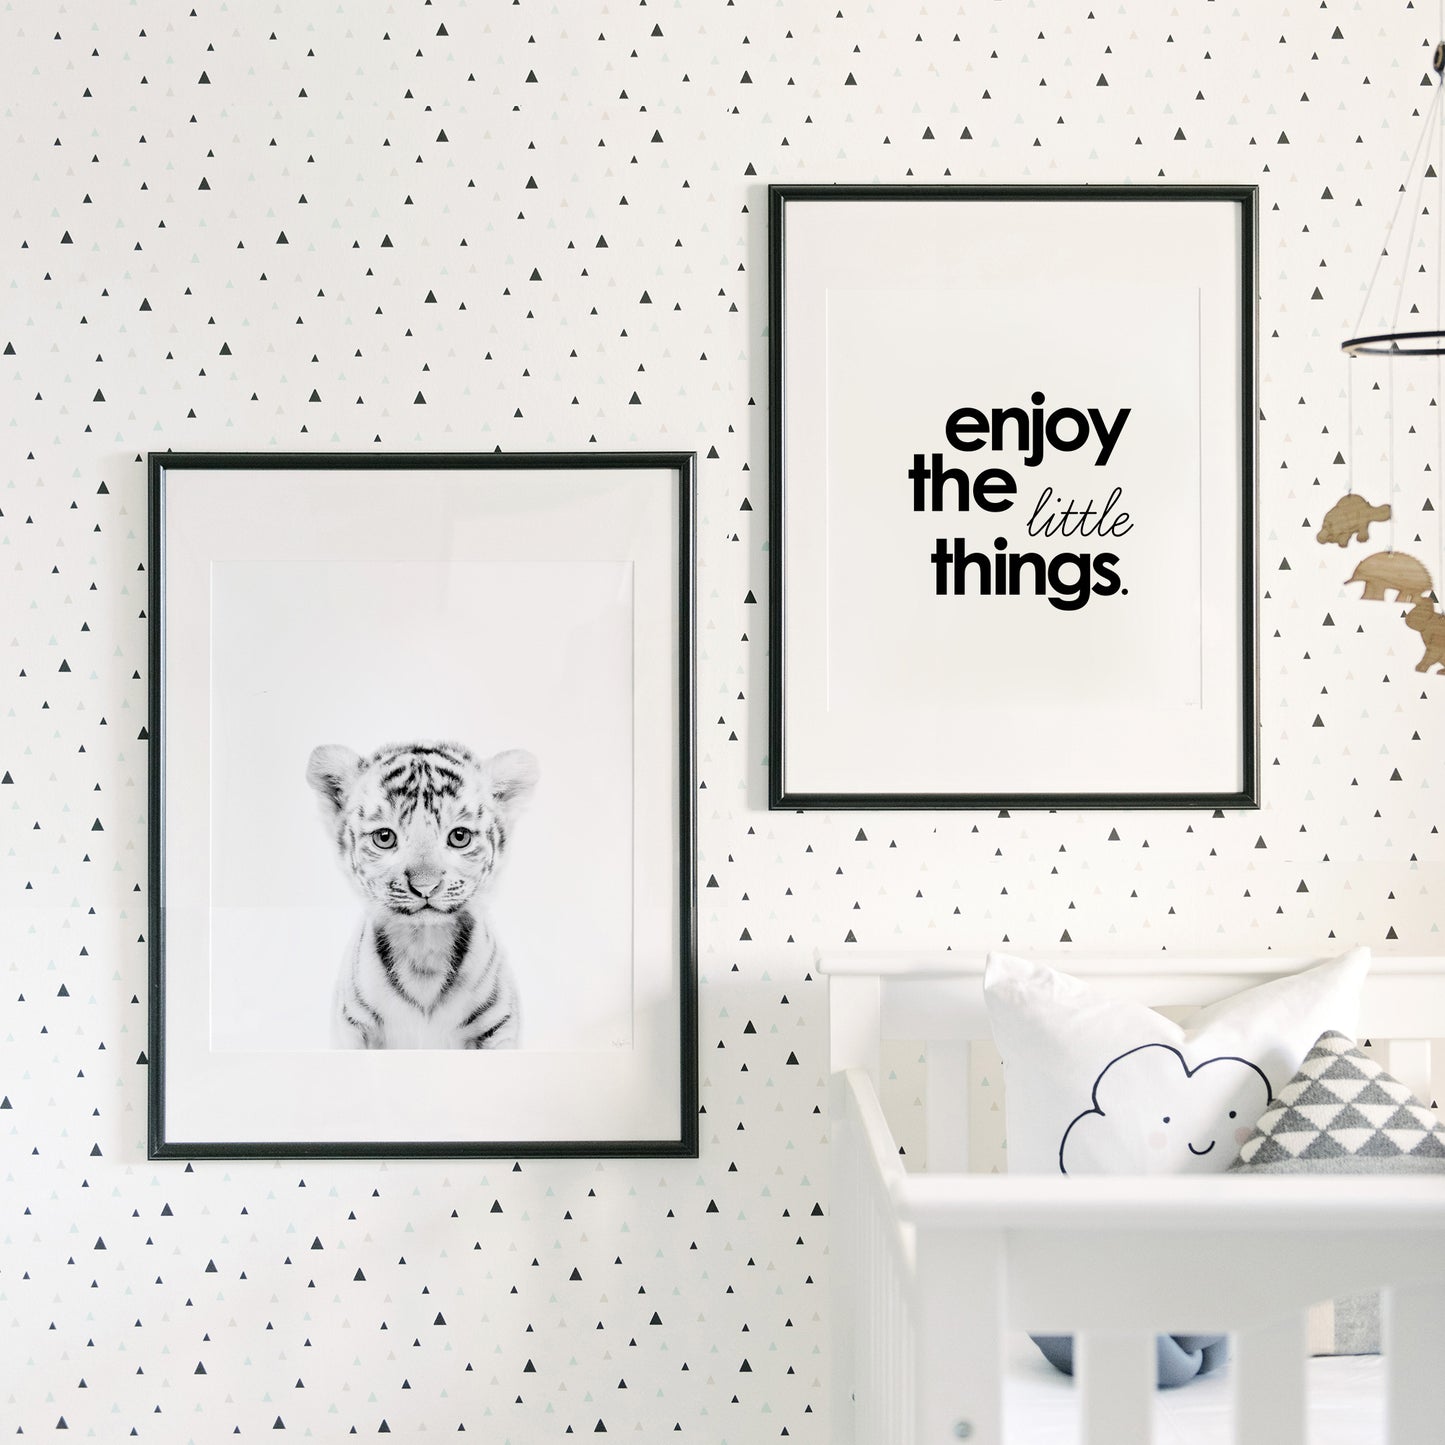 Black and White Snow Tiger Wall Art for nursery 